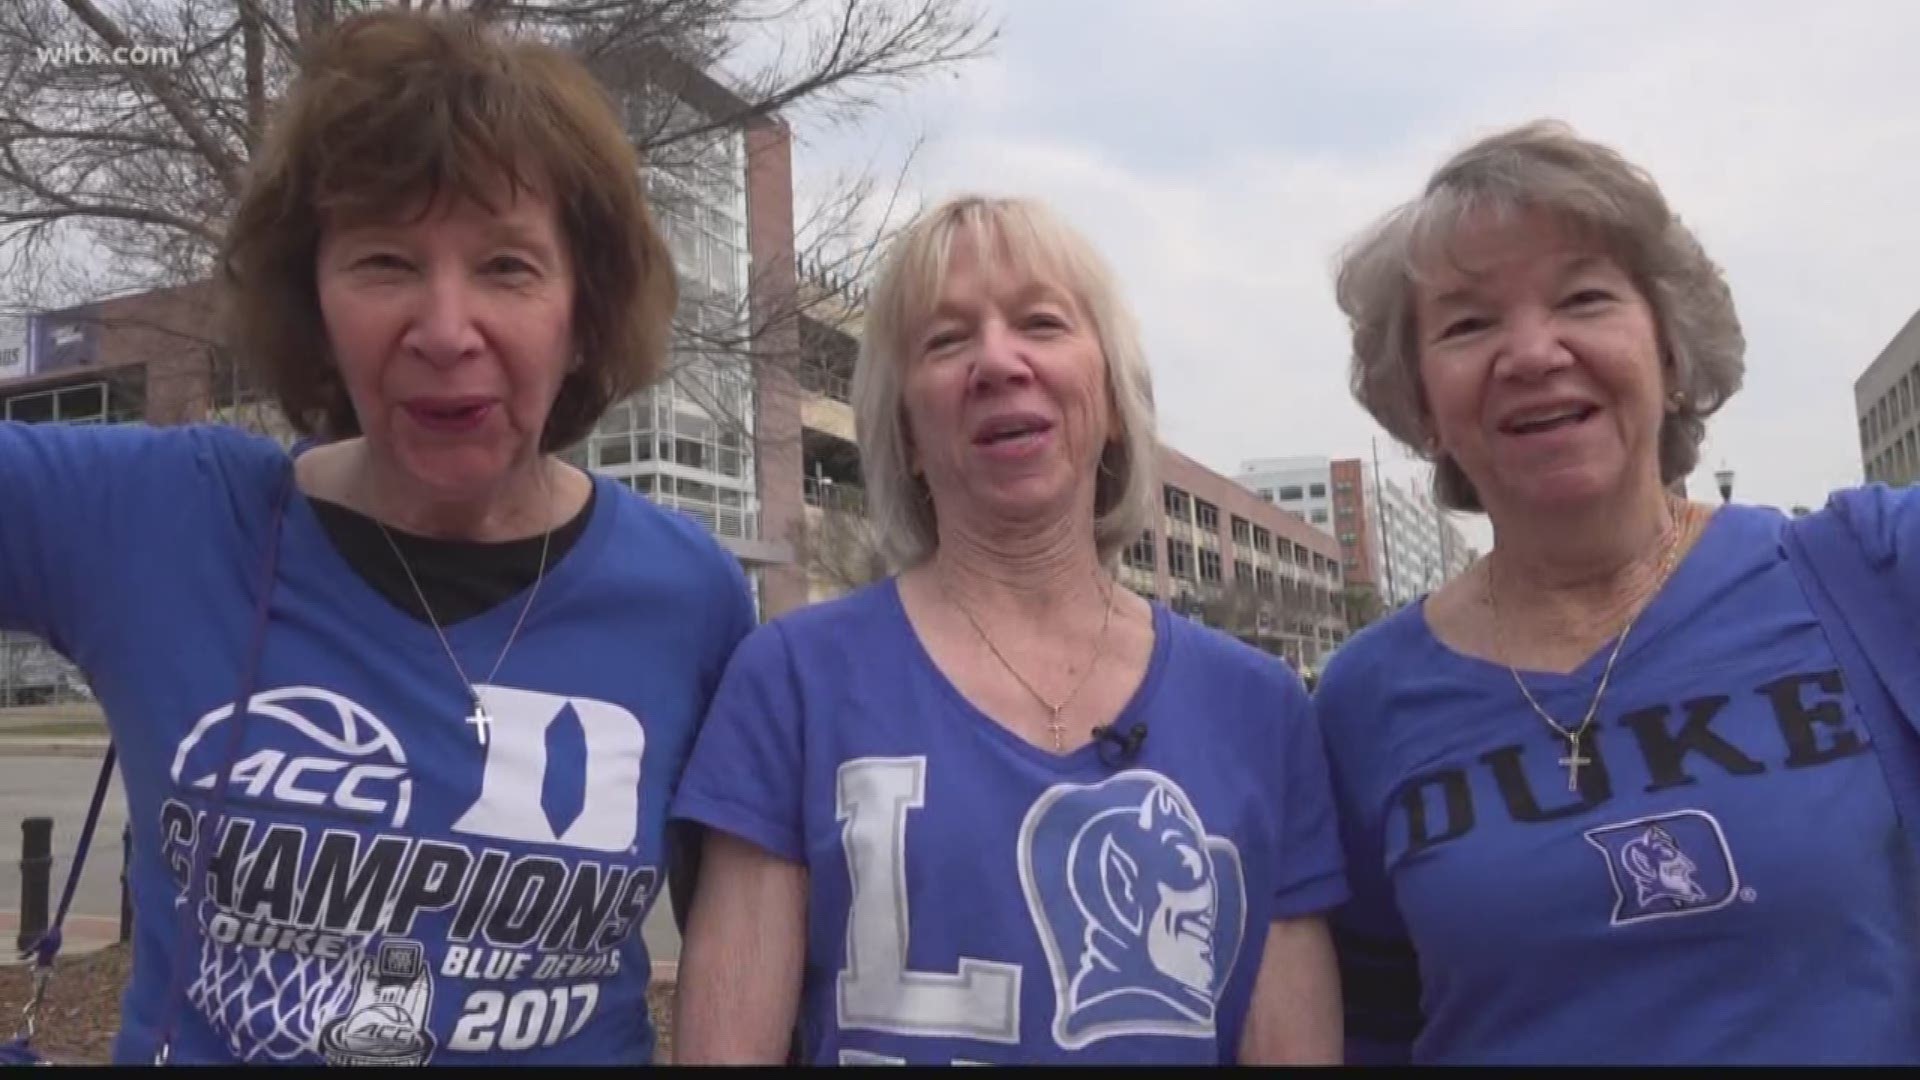 Three Duke fans traveled the distance to see their favorite team.